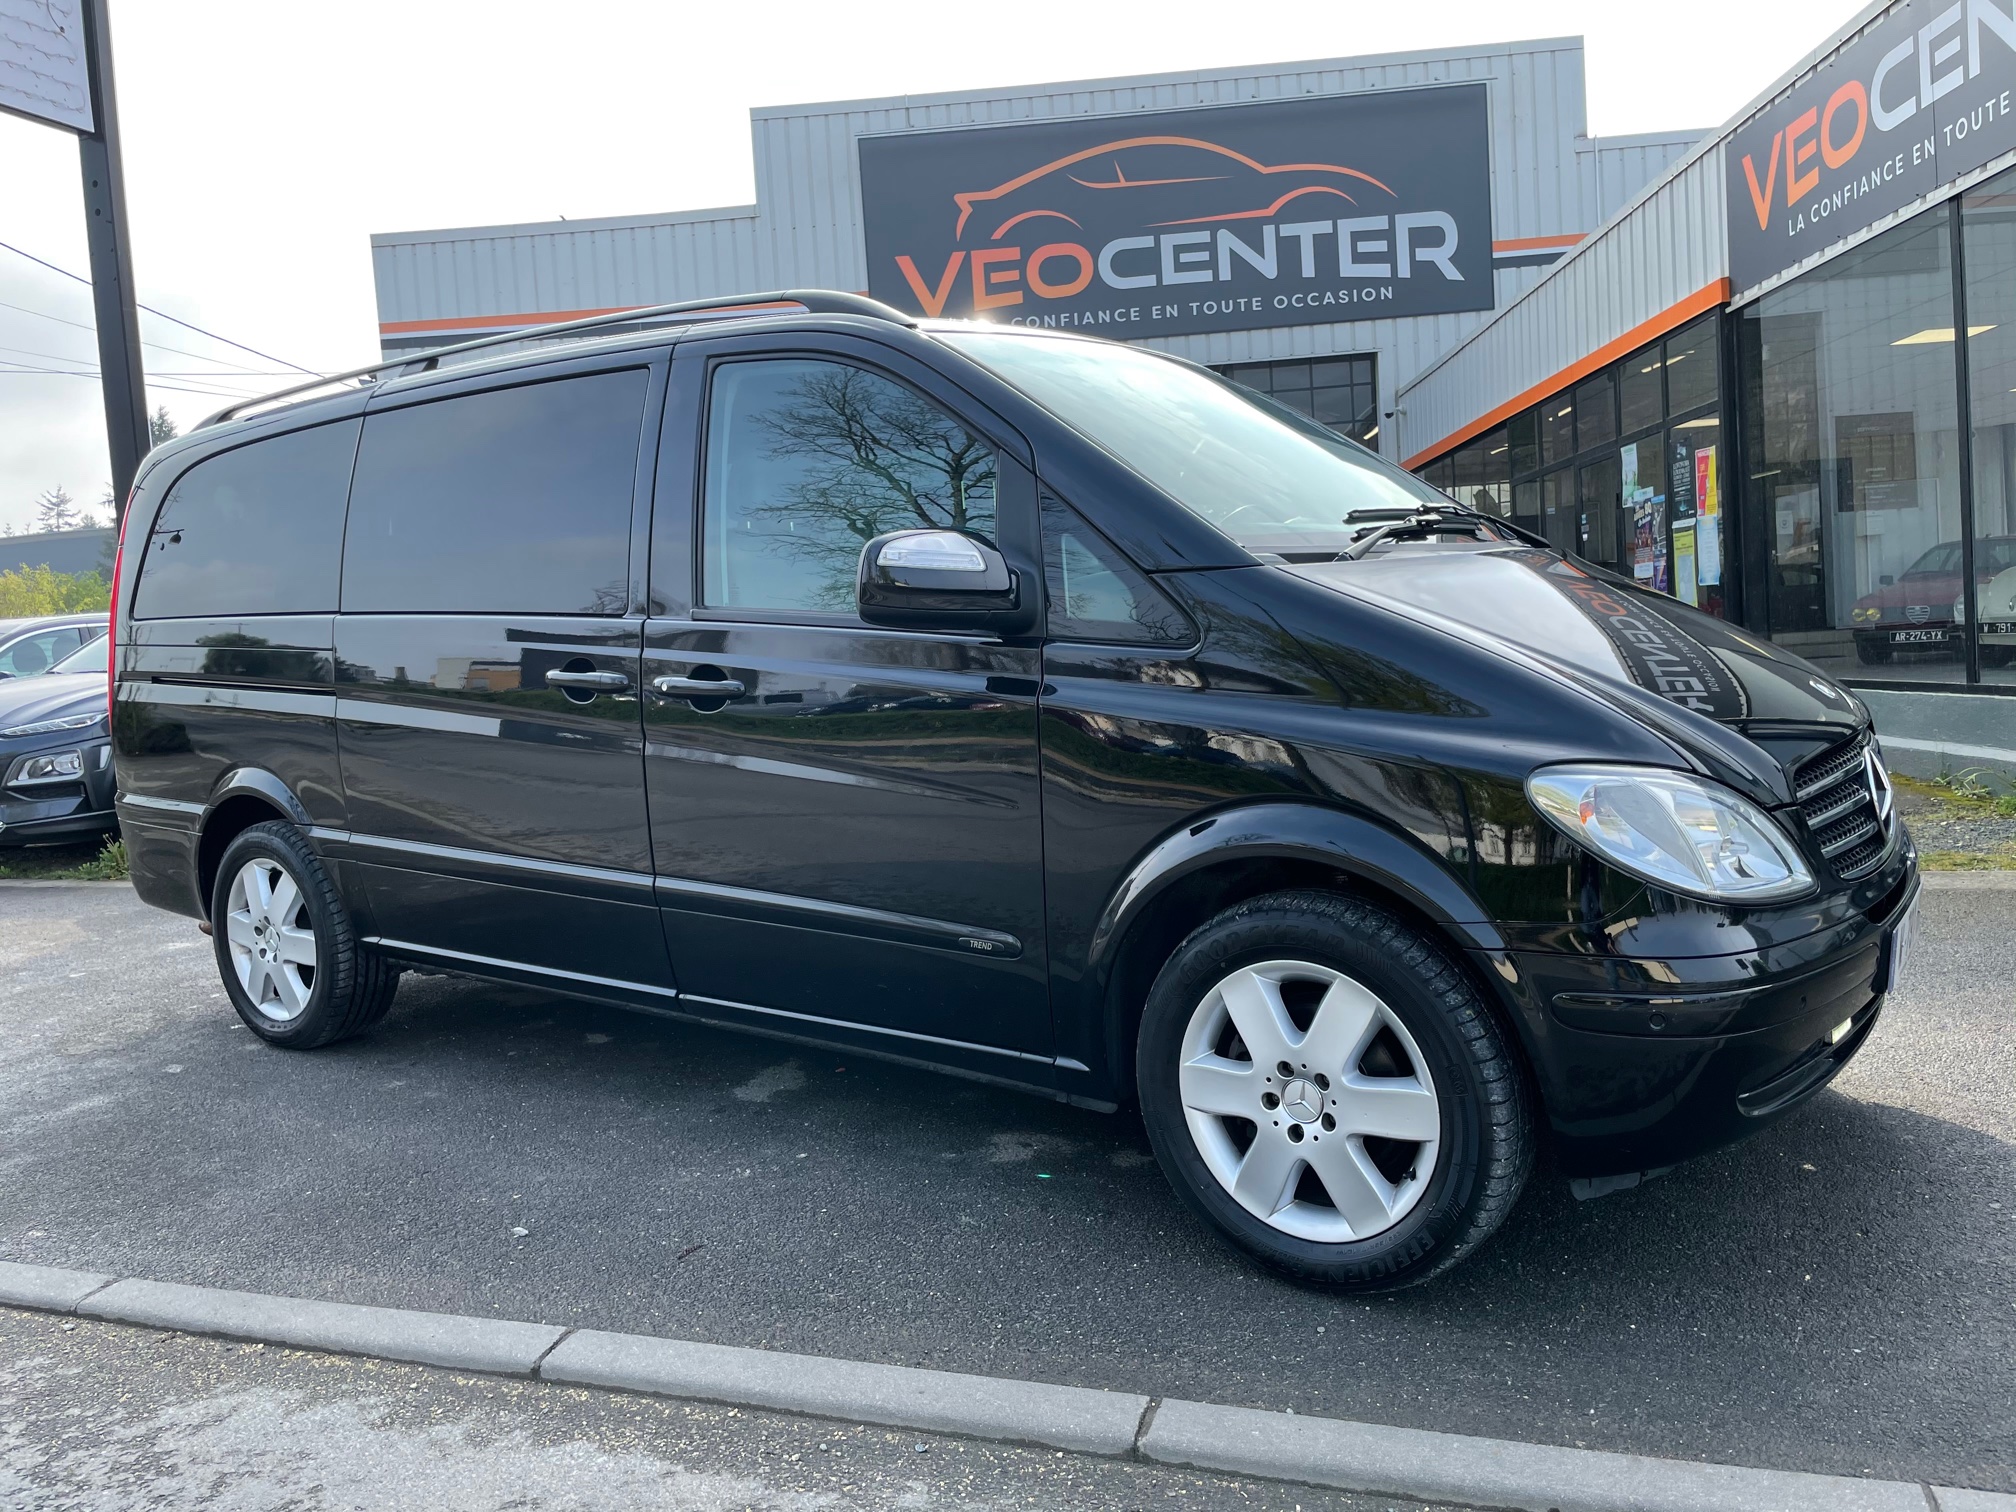 Veocenter 2010 Mercedes Viano 2 2 Cdi 150cv Long Trend Edition 8 Places